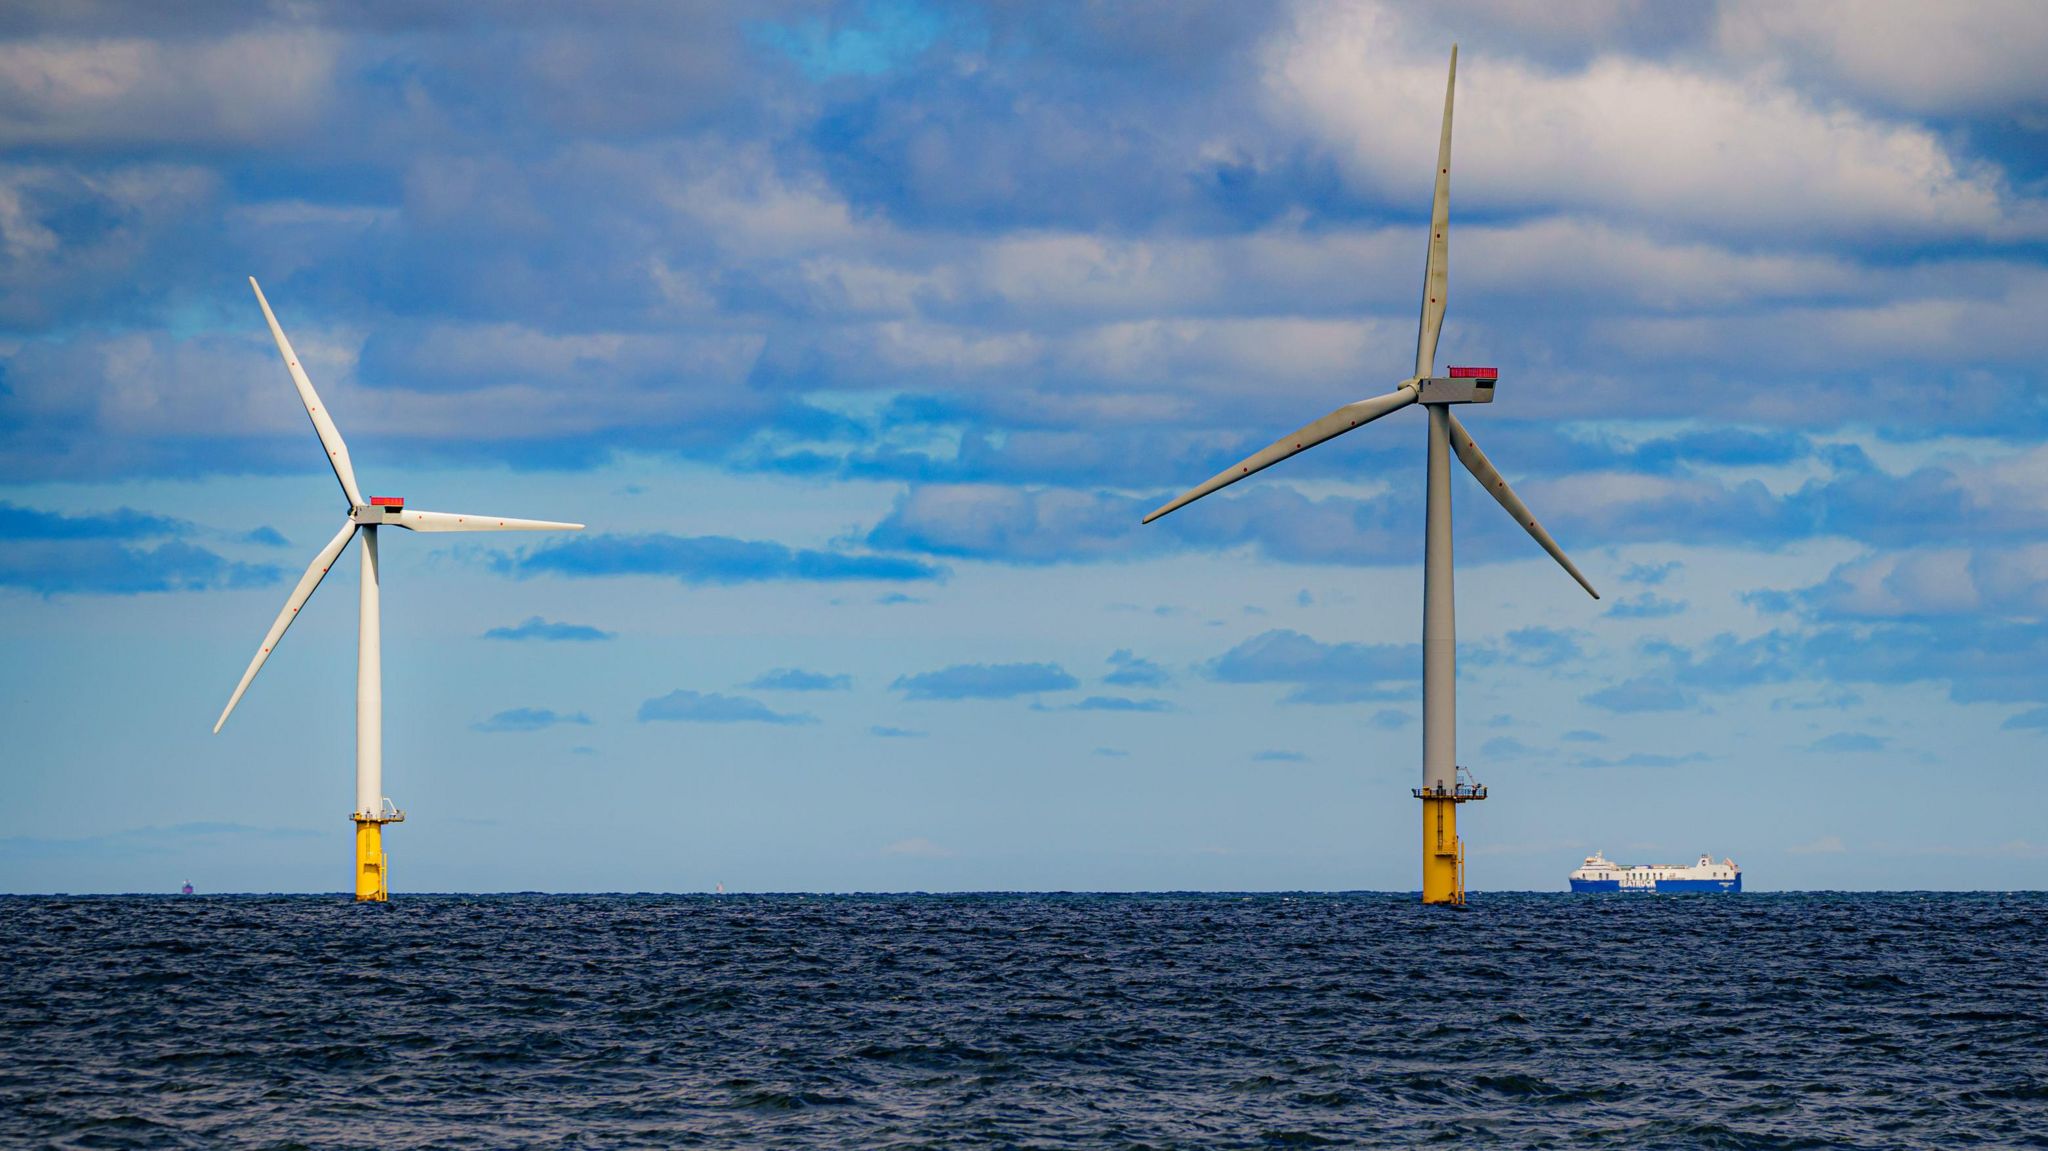 Offshore wind turbines with a ship passing by